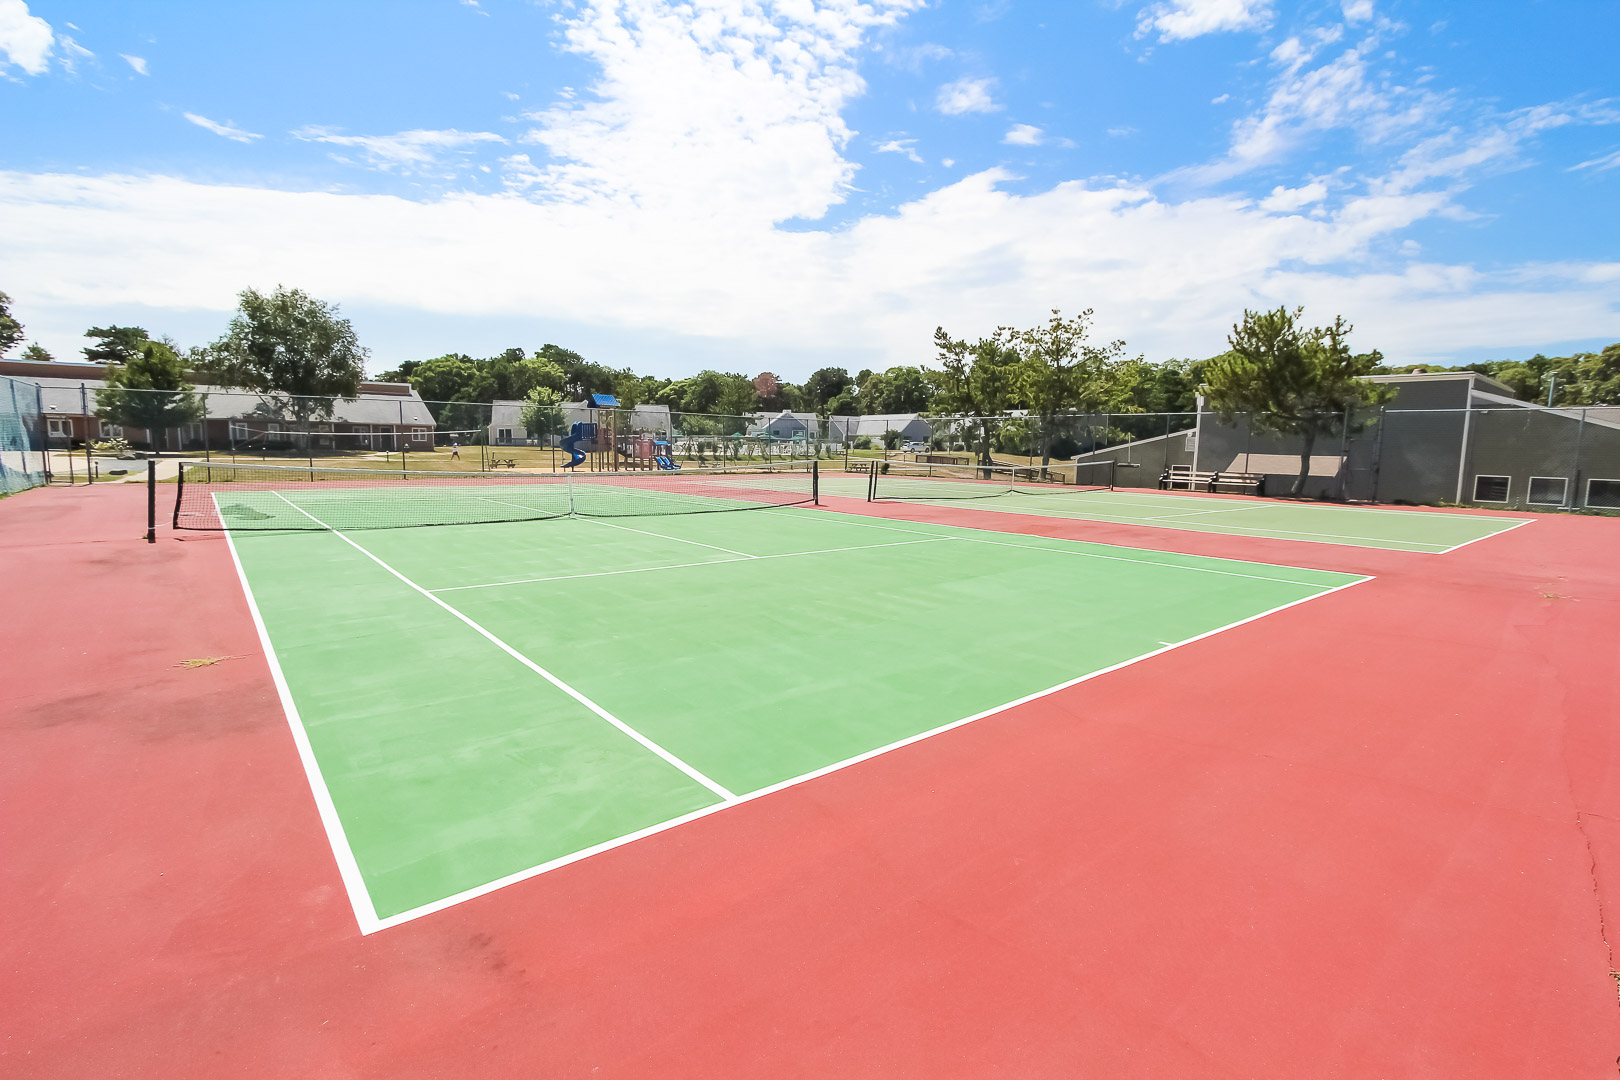 Full size tennis courts available for the family to enjoy at VRI's Brewster Green Resort in Massachusetts.